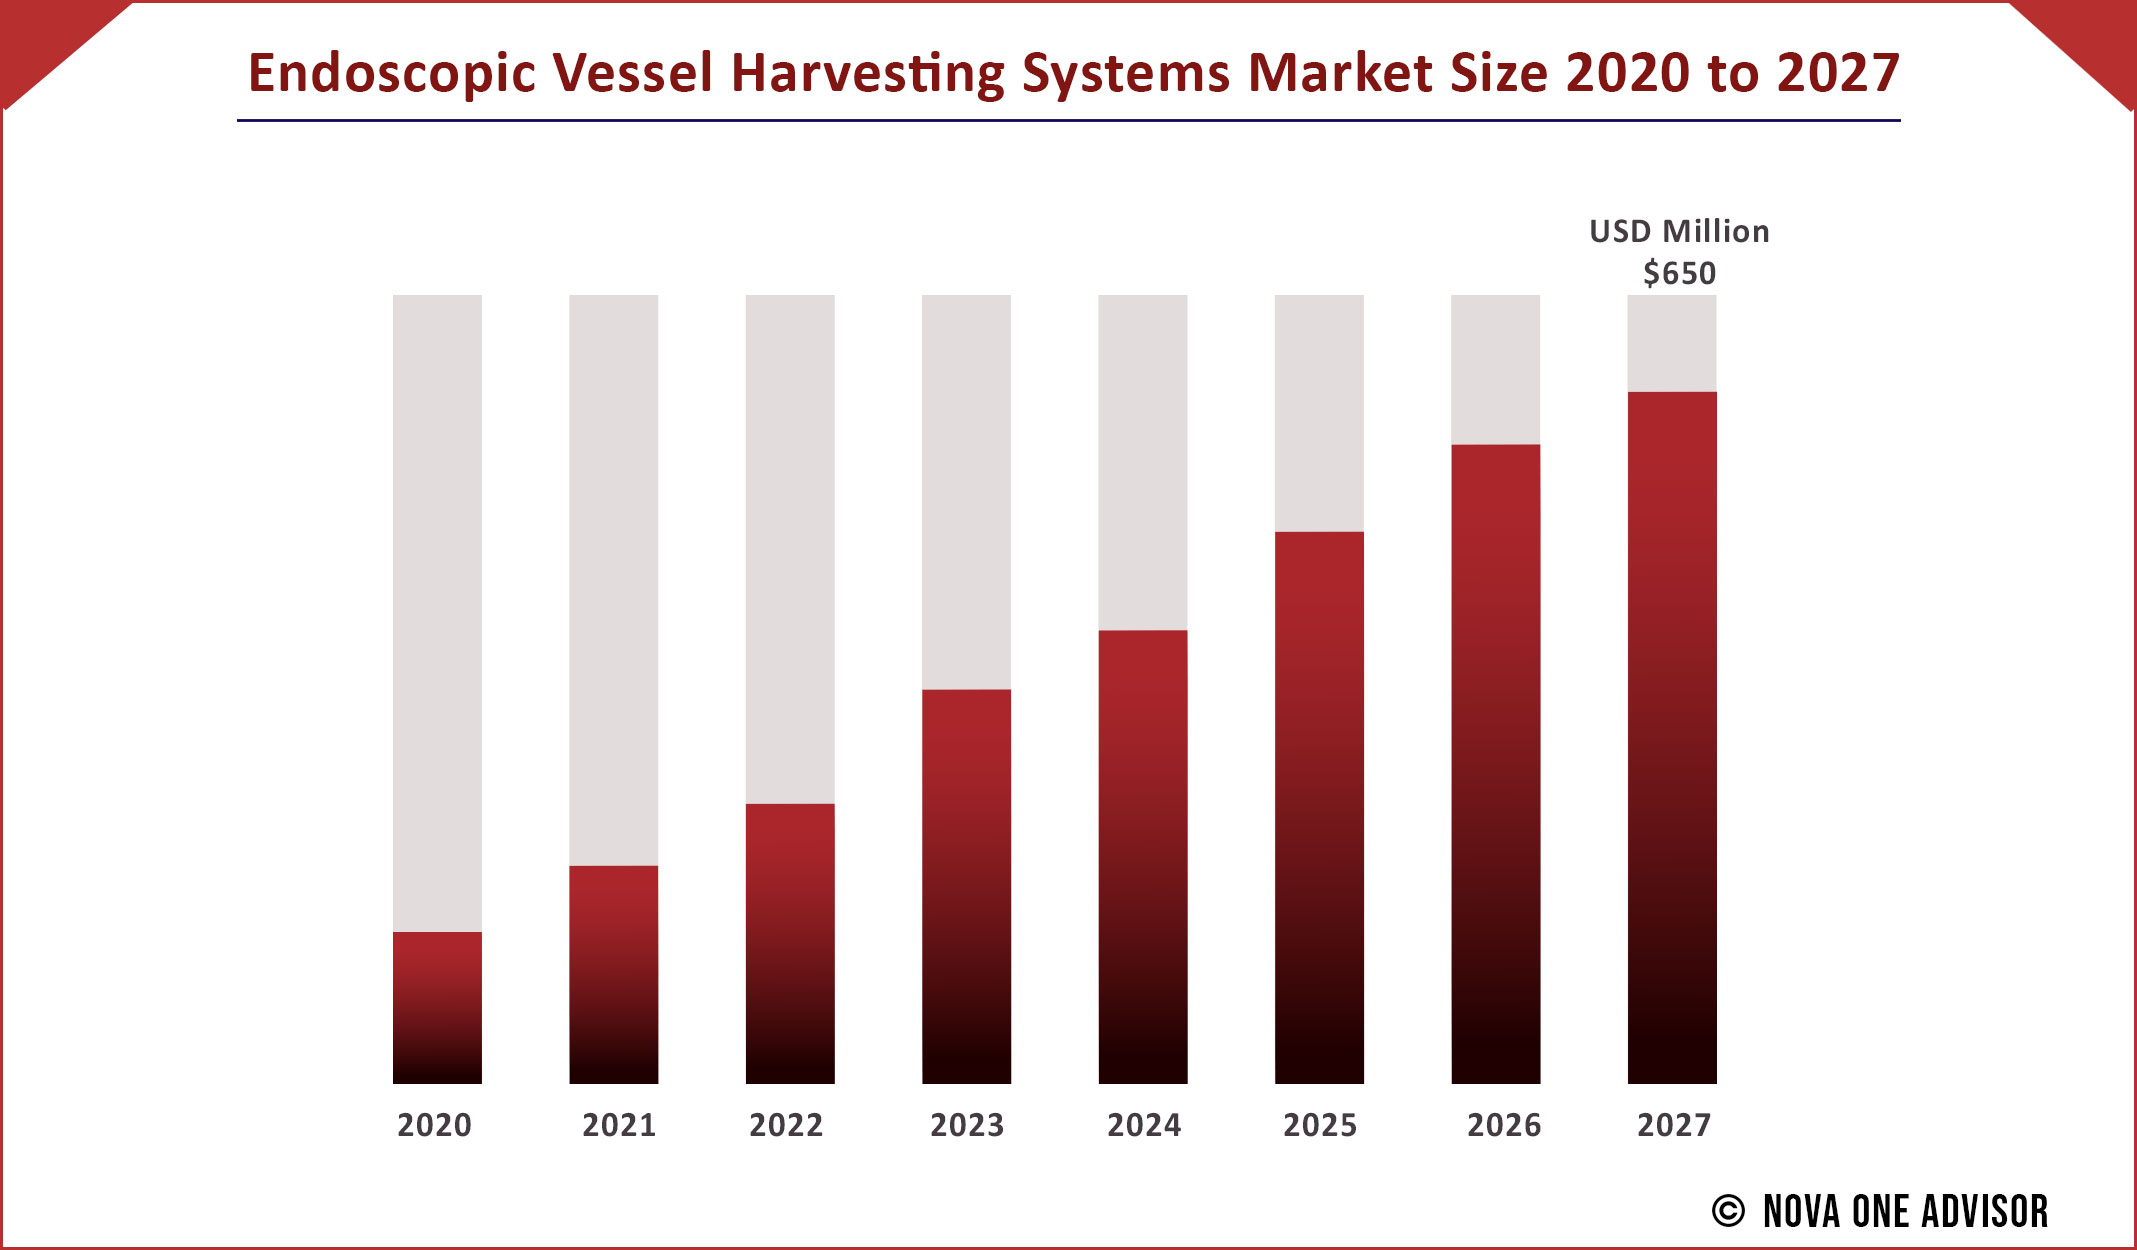 Endoscopic Vessel Harvesting Systems Market Size 2020 to 2027